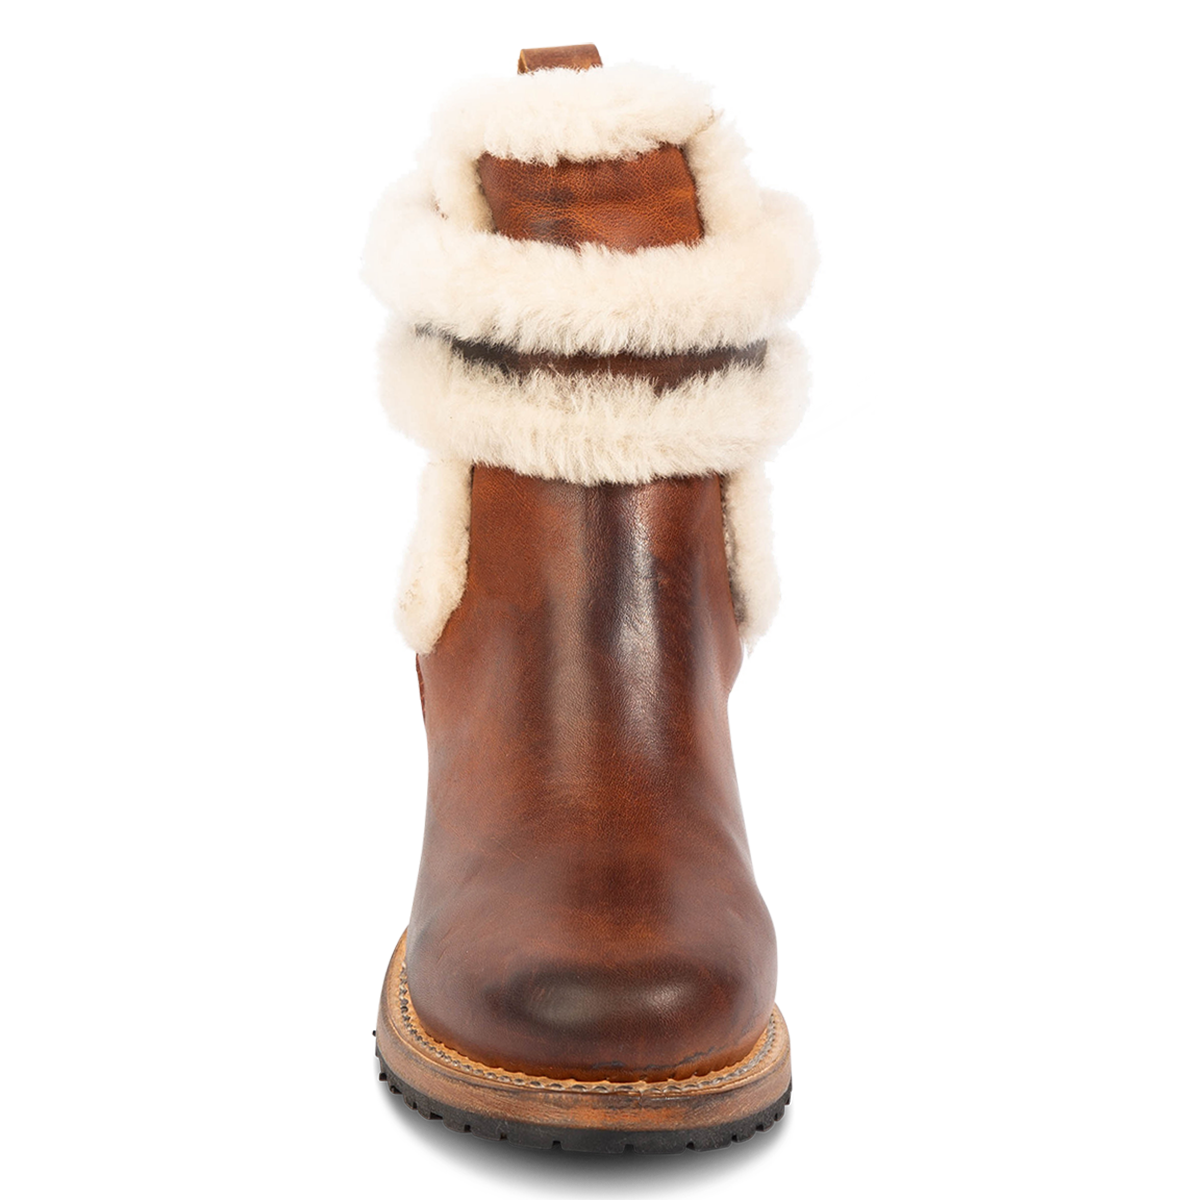 Front view showing FREEBIRD women's Neverland tan leather bootie with genuine shearling shaft lining, a rounded toe and rubber tread sole